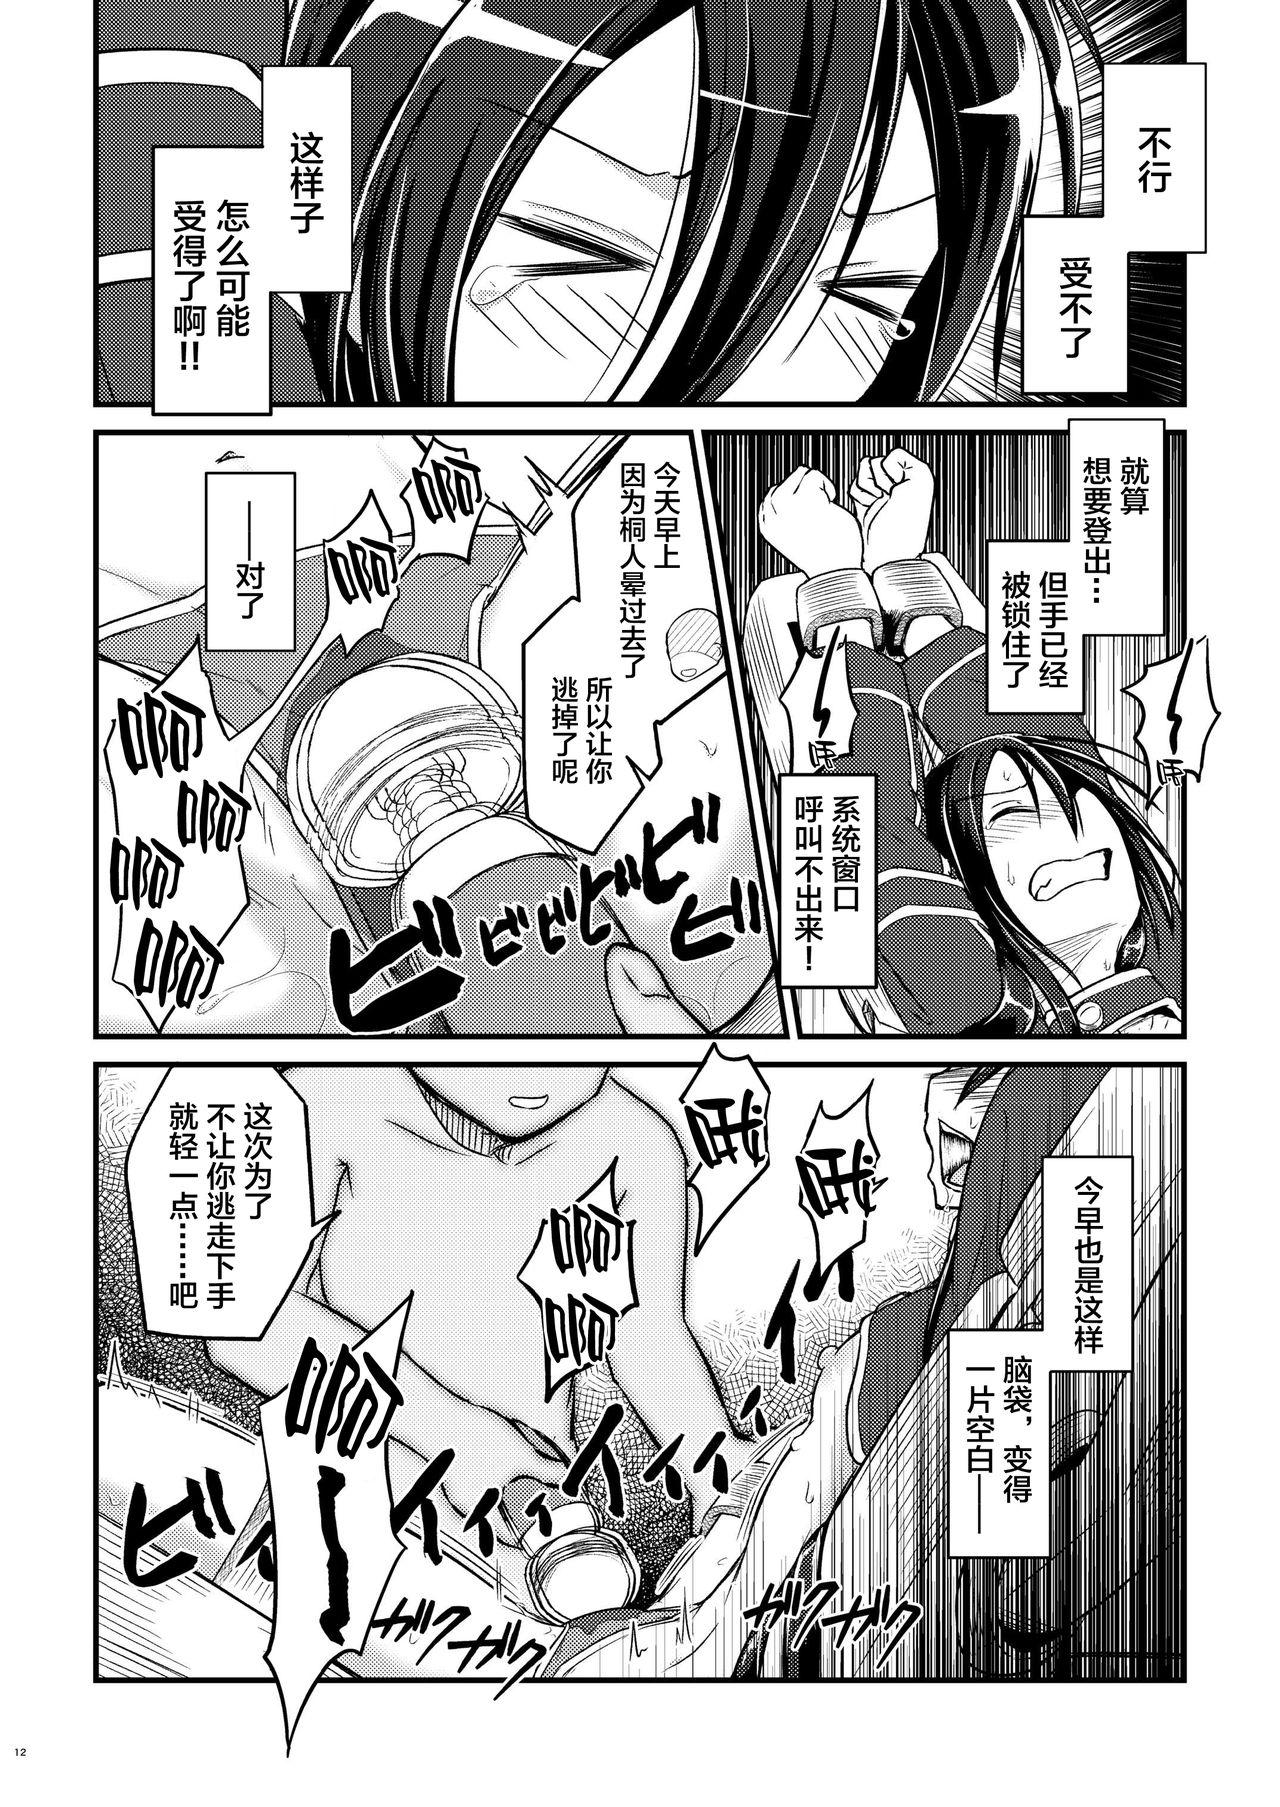 Euro Kiriko Route Another A Part Set - Sword art online Male - Page 11